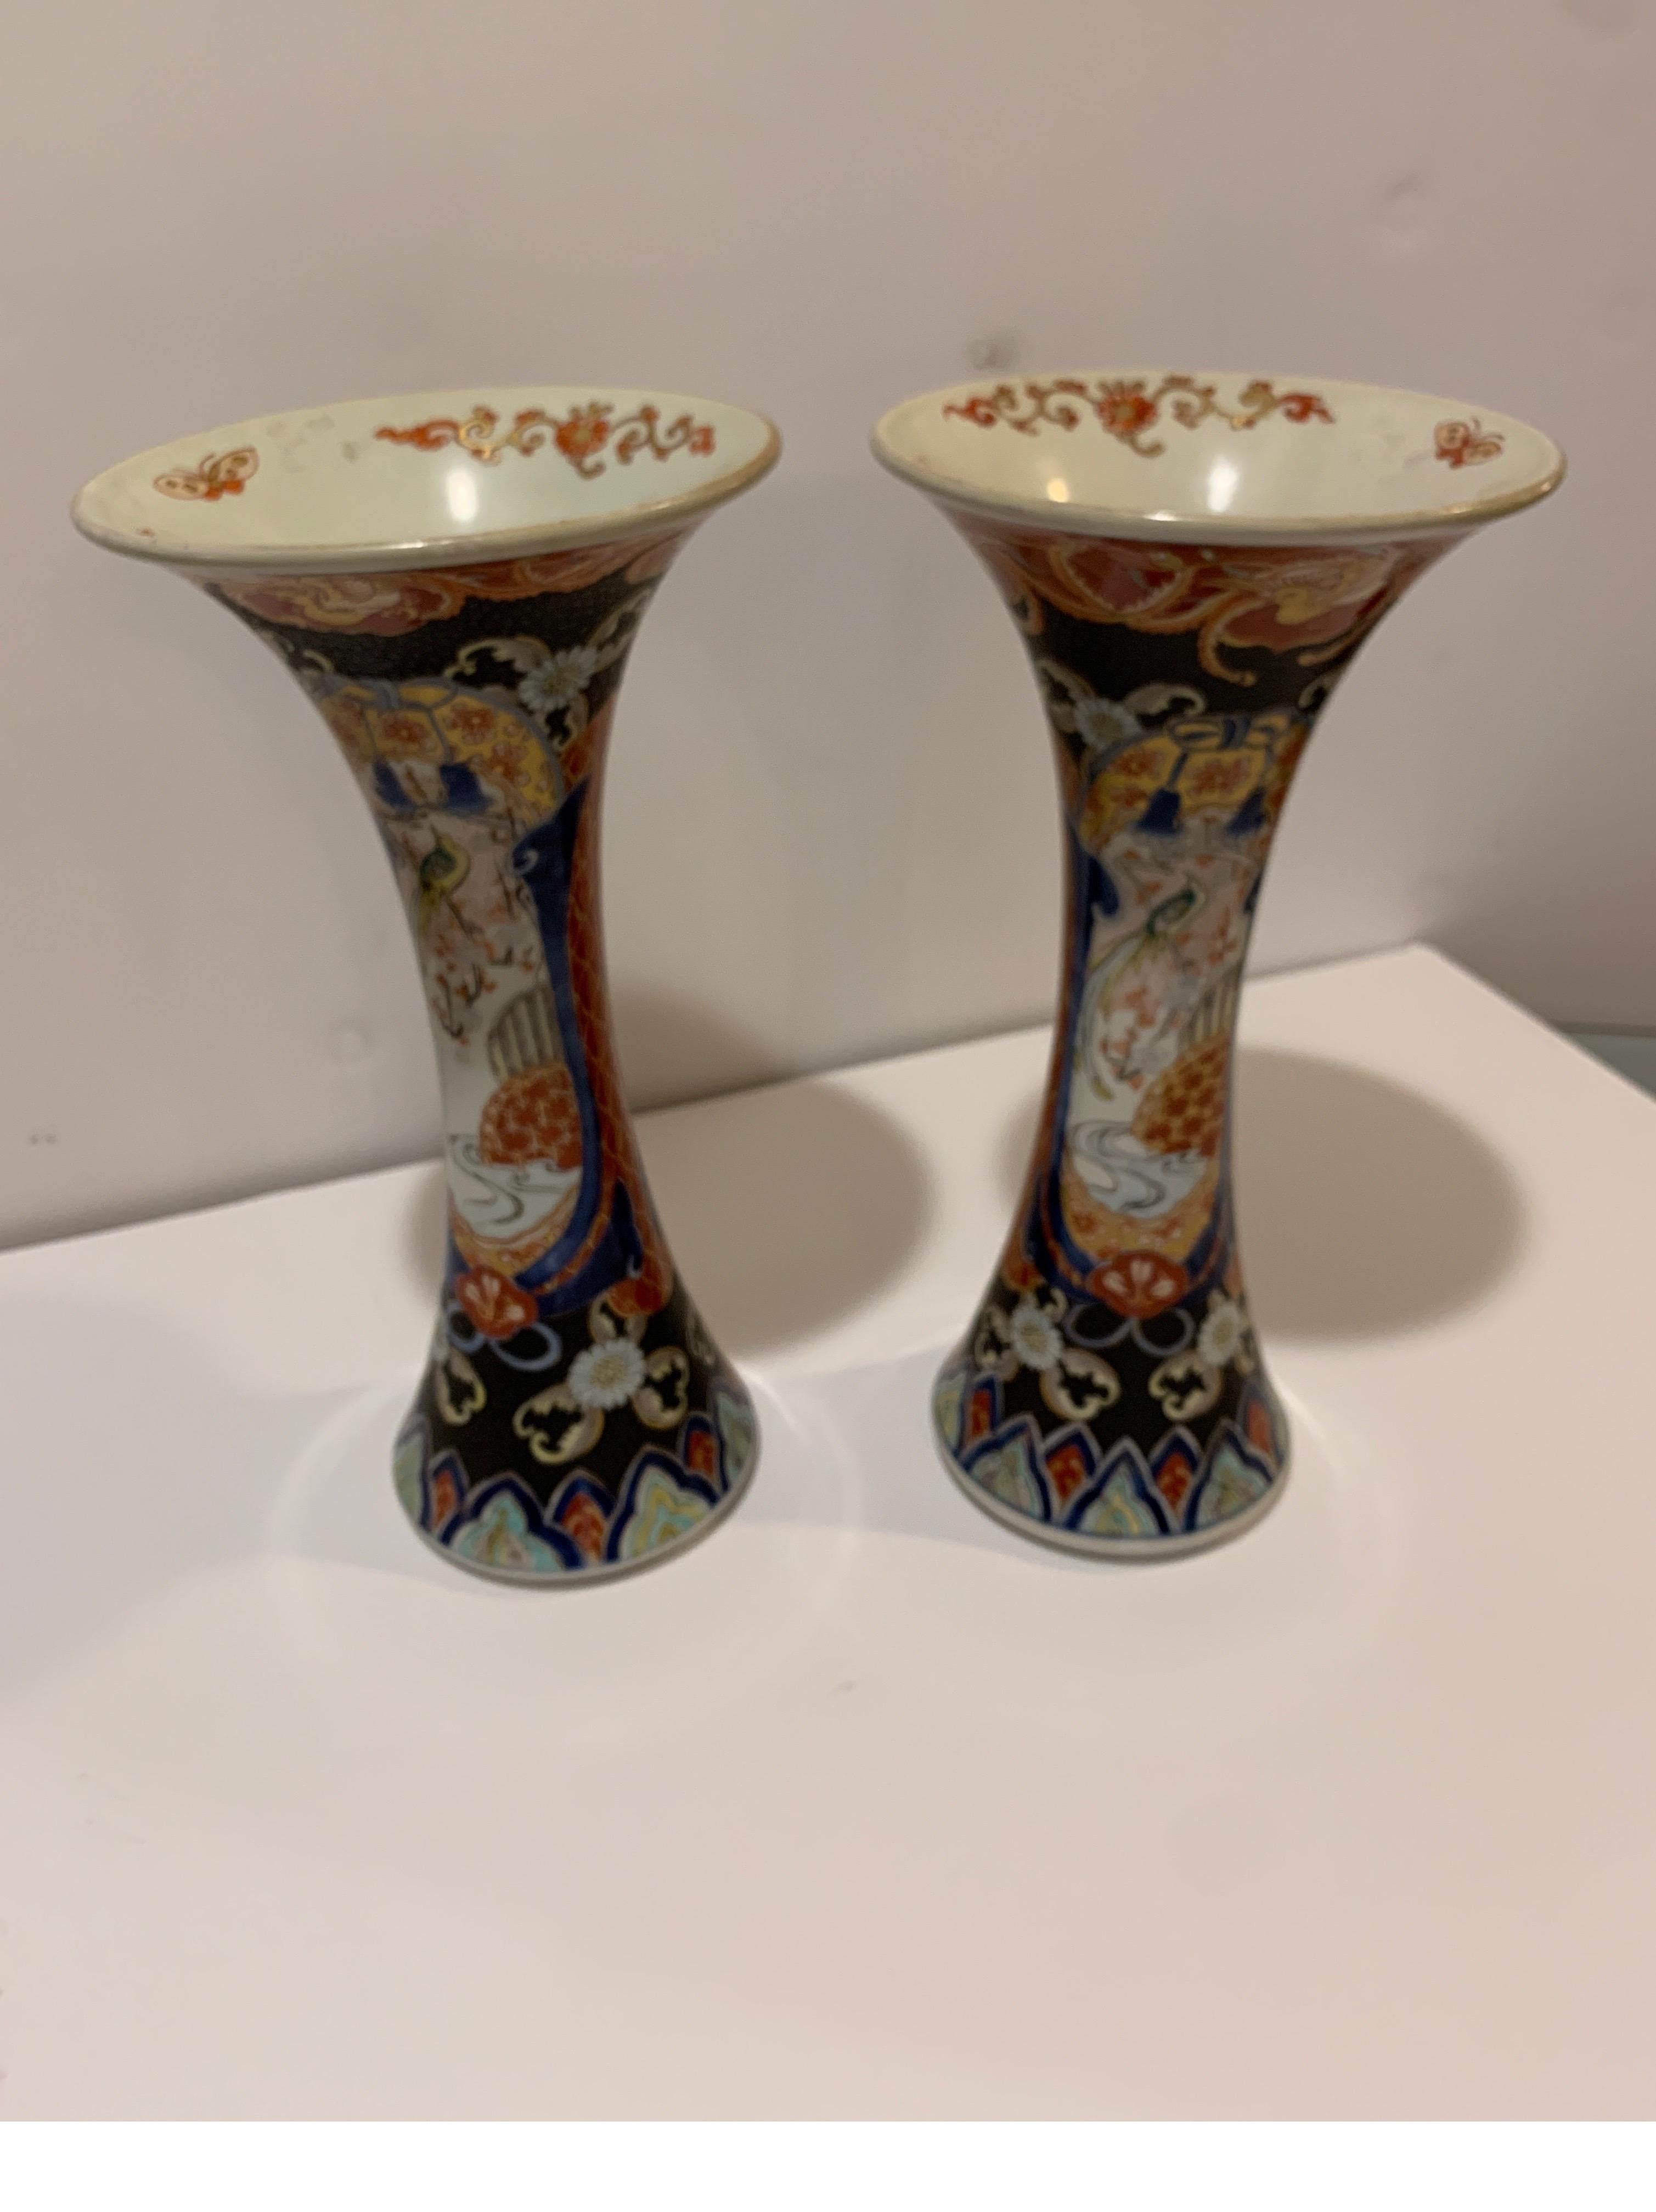 Excellent pair of hand painted Japanese Imari porcelain trumpet vases in Classic Imari iron red and blue. Rare form and an original matched pair, circa 1880, measures: 12 inches tall.